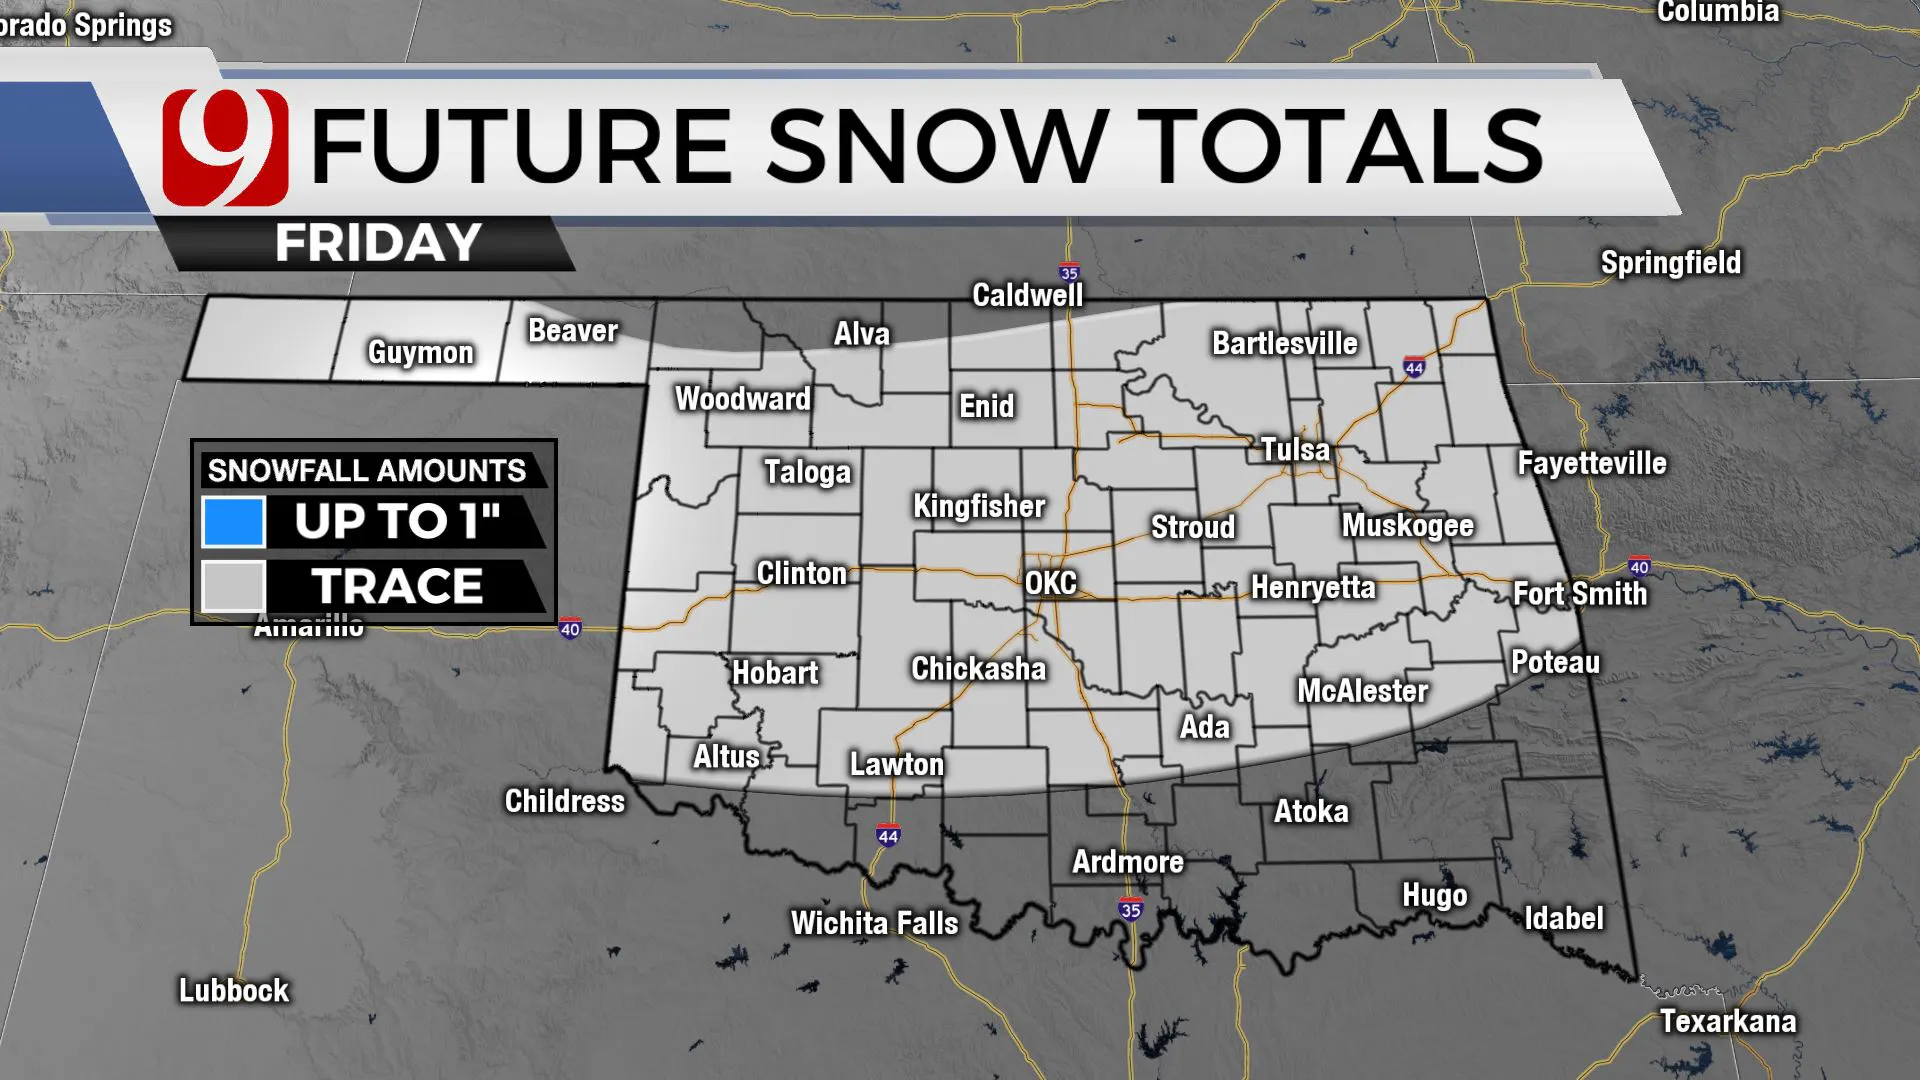 Future snow totals across the state.